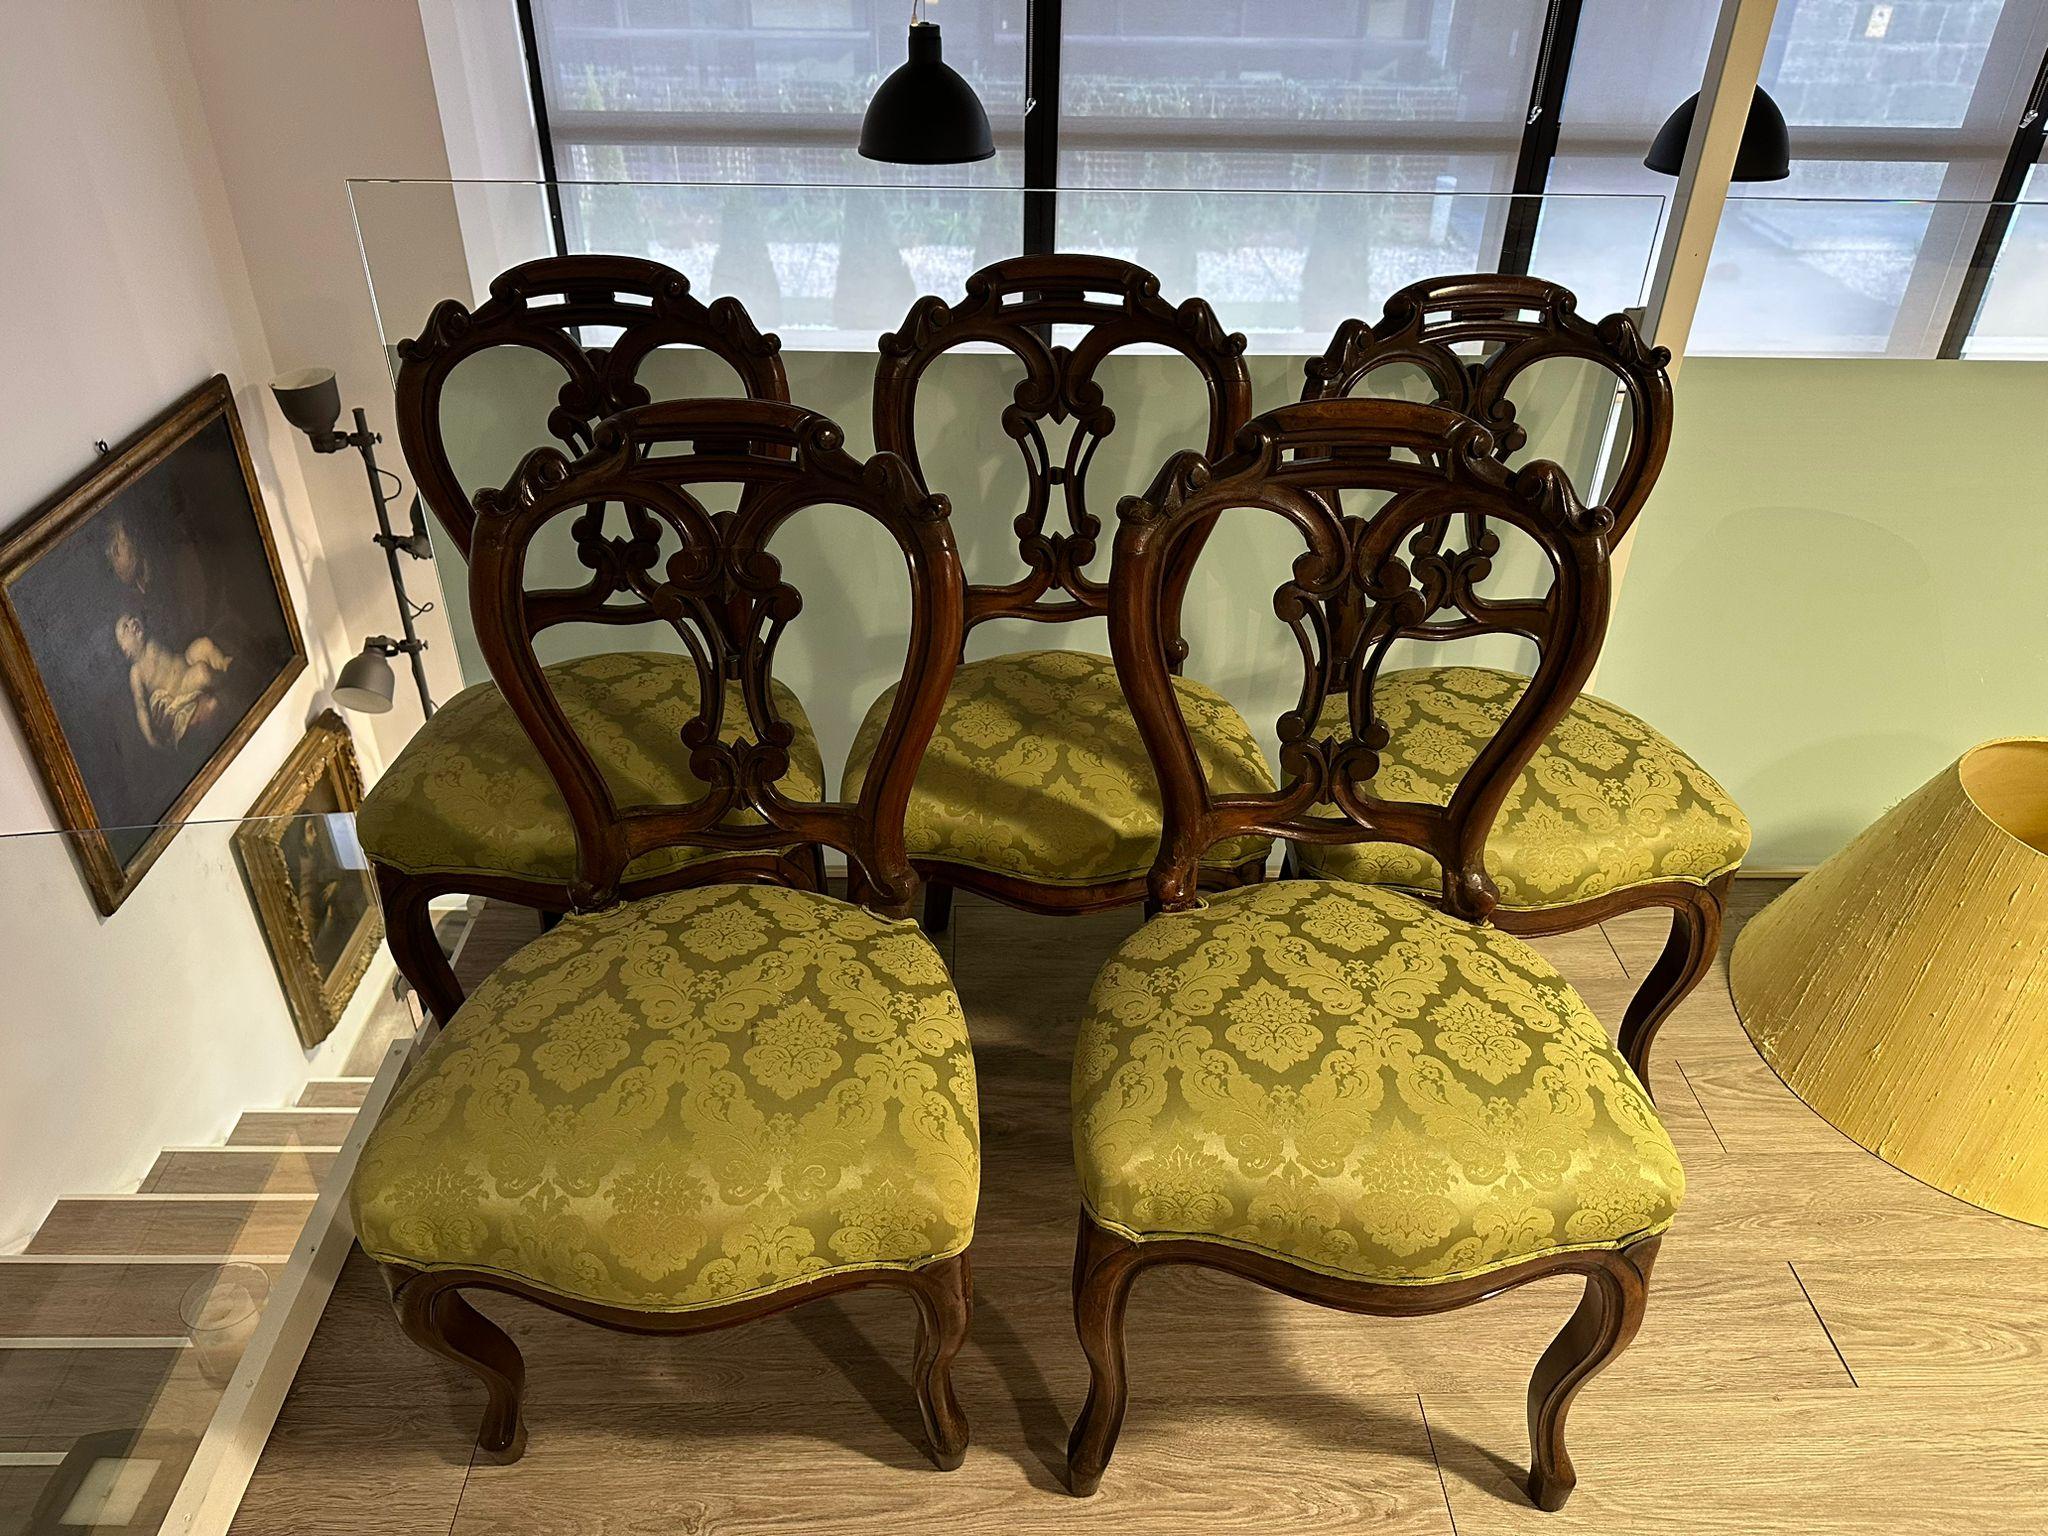 Set of five chairs

Romantic
Mahogany with carvings
Backrests with cut-out, ribbed and pierced tables, seats upholstered in damask fabric in shades of green, curved legs
Portuguese
Century 19th (2nd half)

Dimensions: - 88 x 46 x 45 cm.